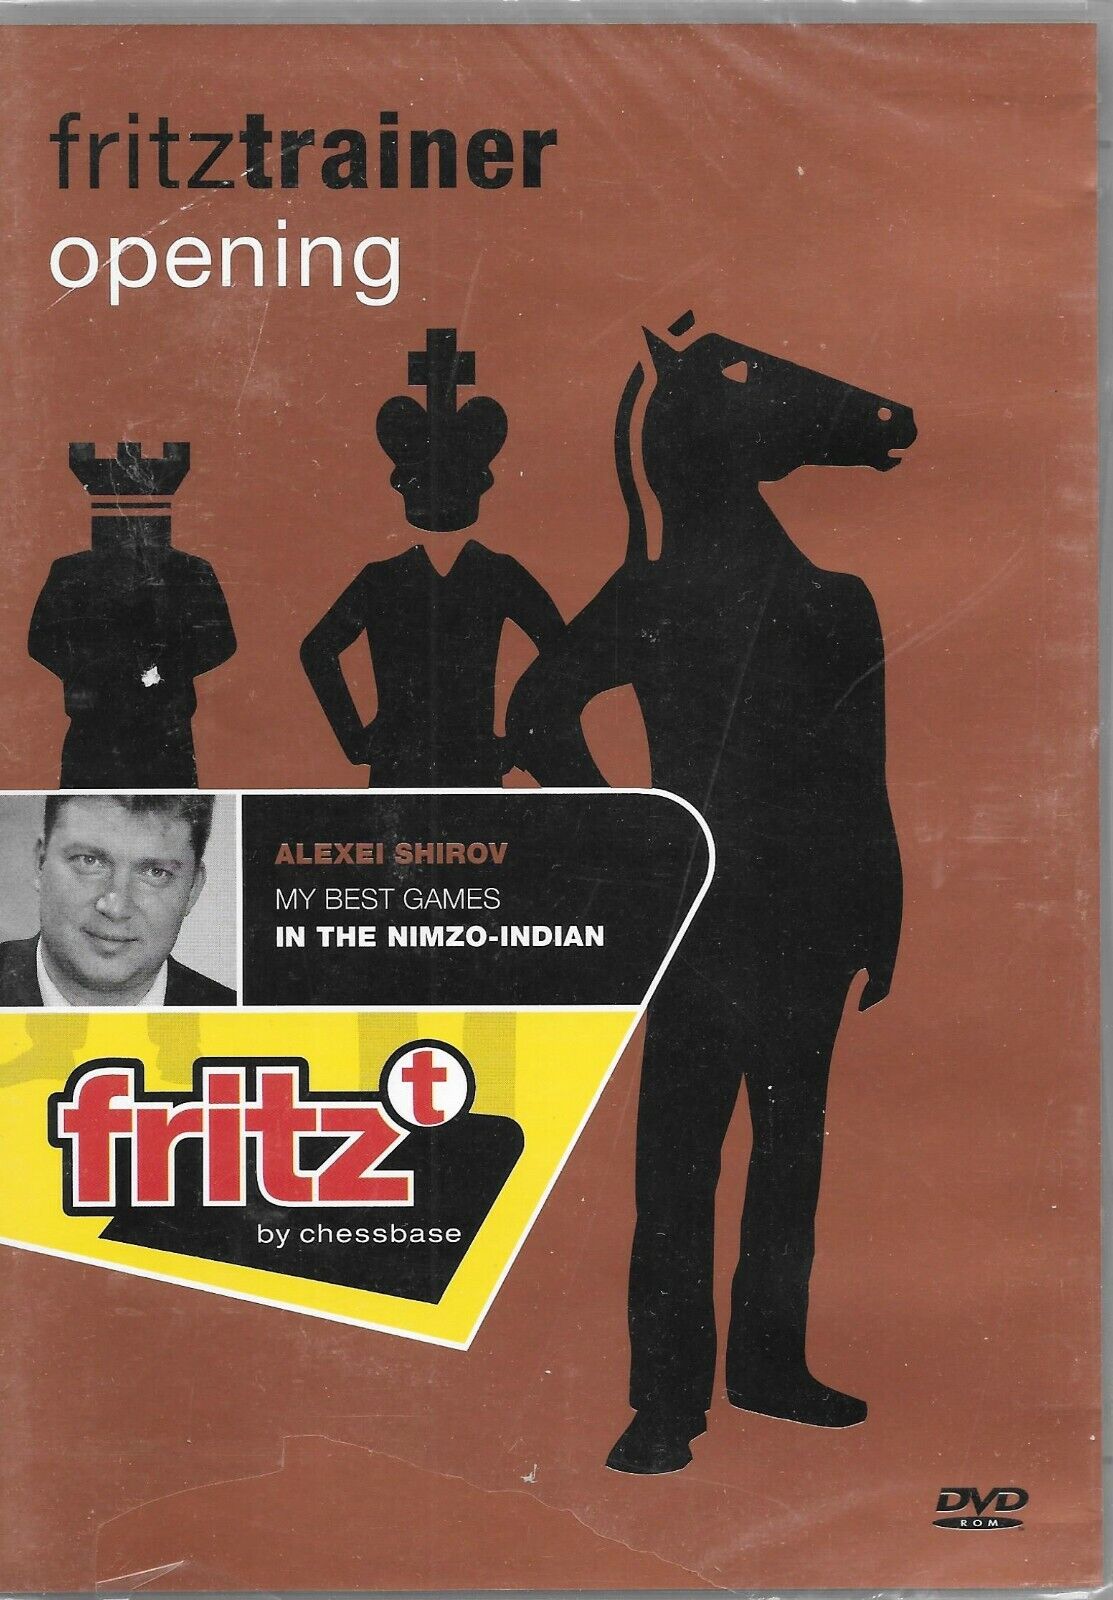 My Best Games in the Nimzo-Indian - Alexei Shirov  Chess DVD Sealed